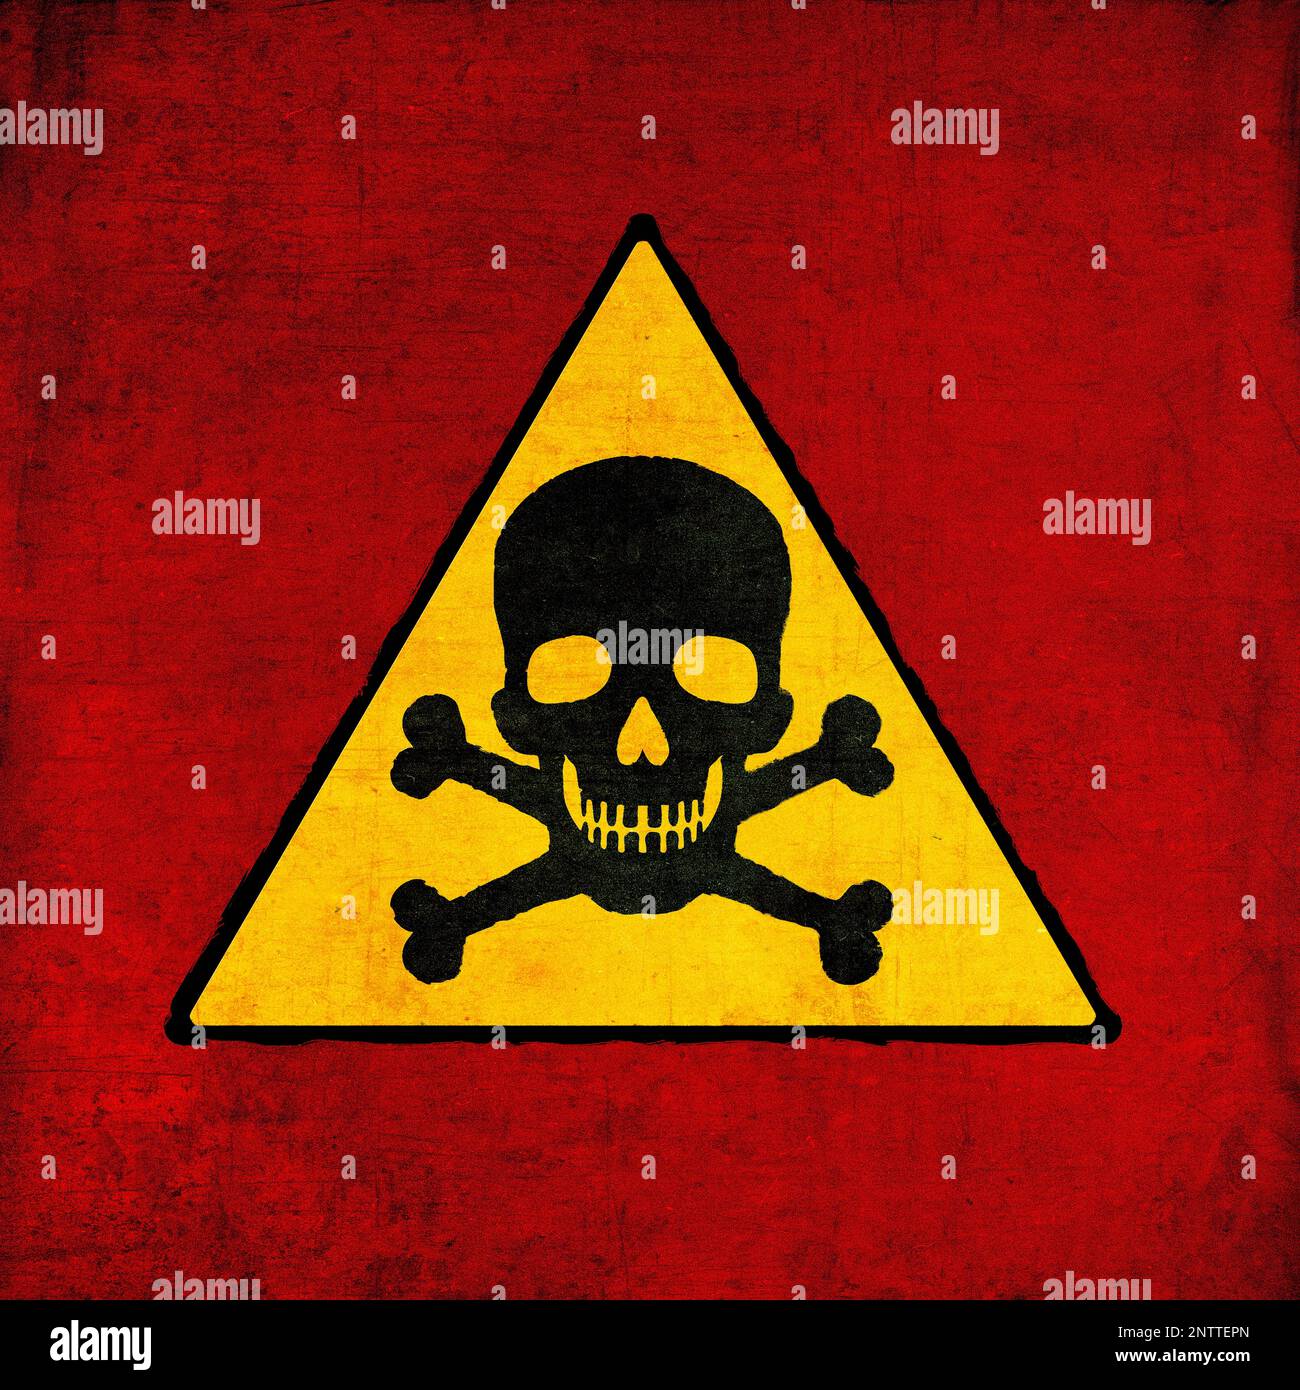 Skull and bones icon, yellow and black on red. Death threat sign, grunge textured Stock Photo